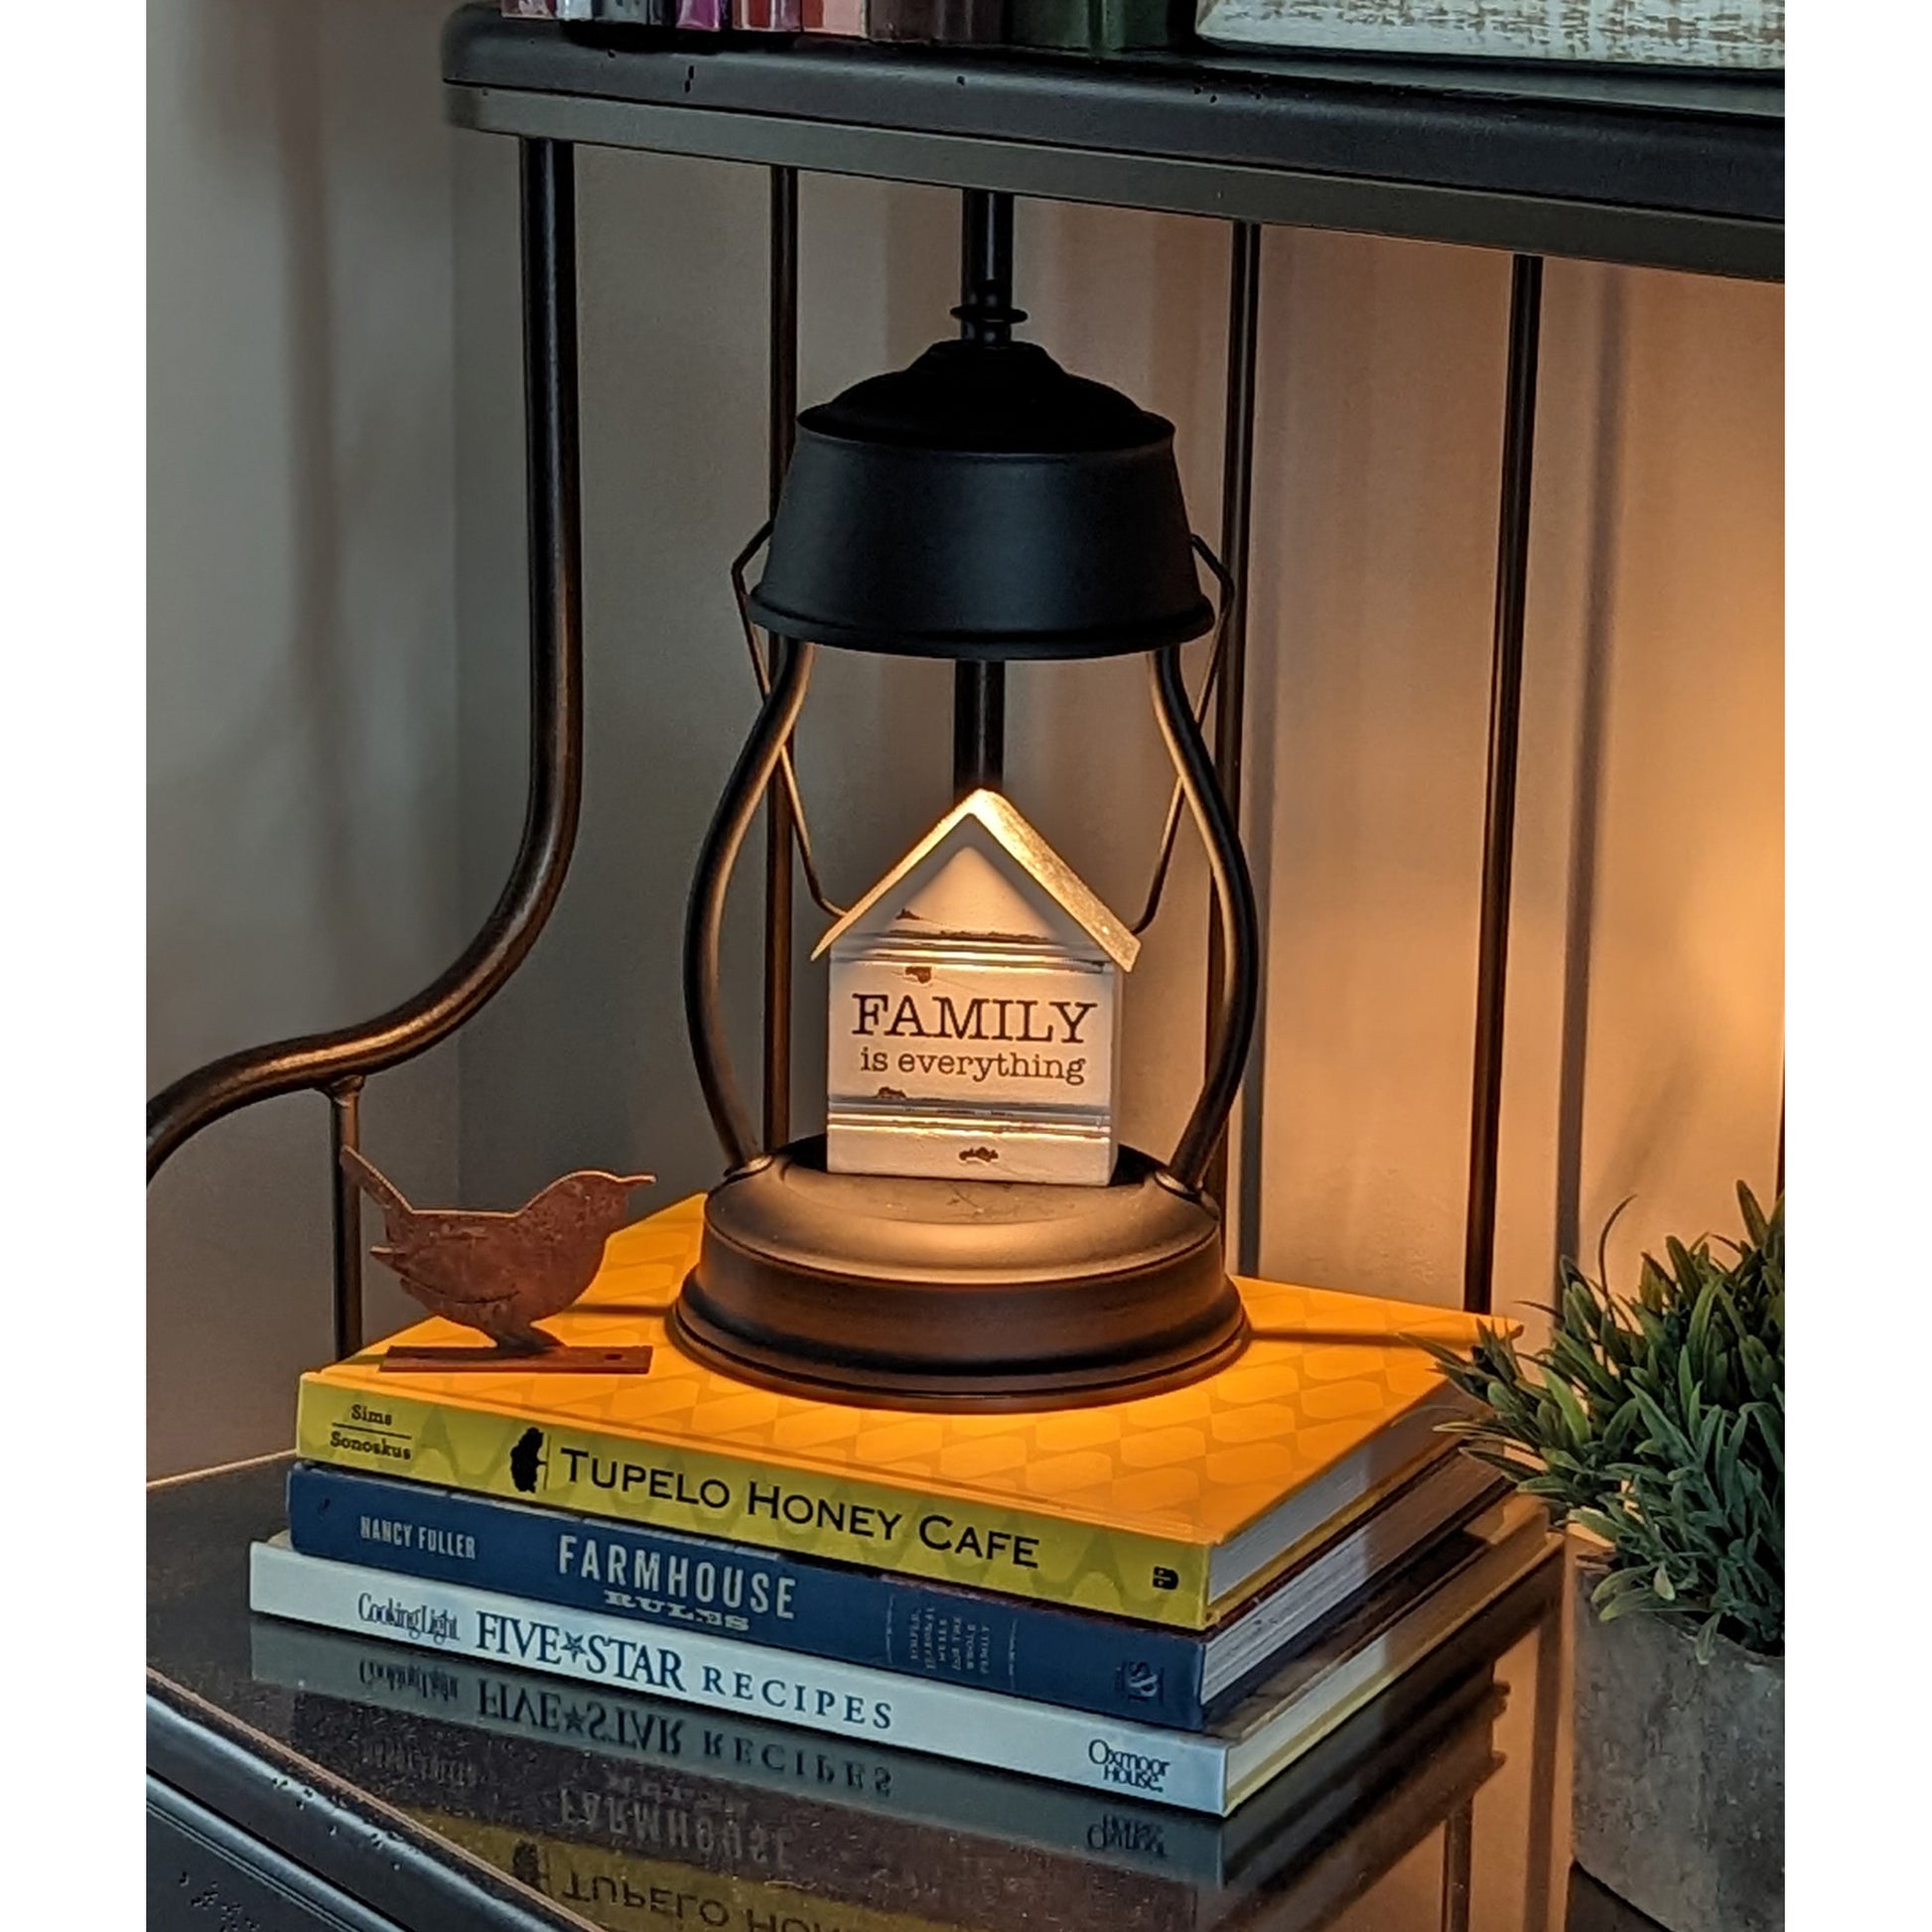 Image, lit black candle warmer with knickknack displayed placed on shelf on top of cookbooks.